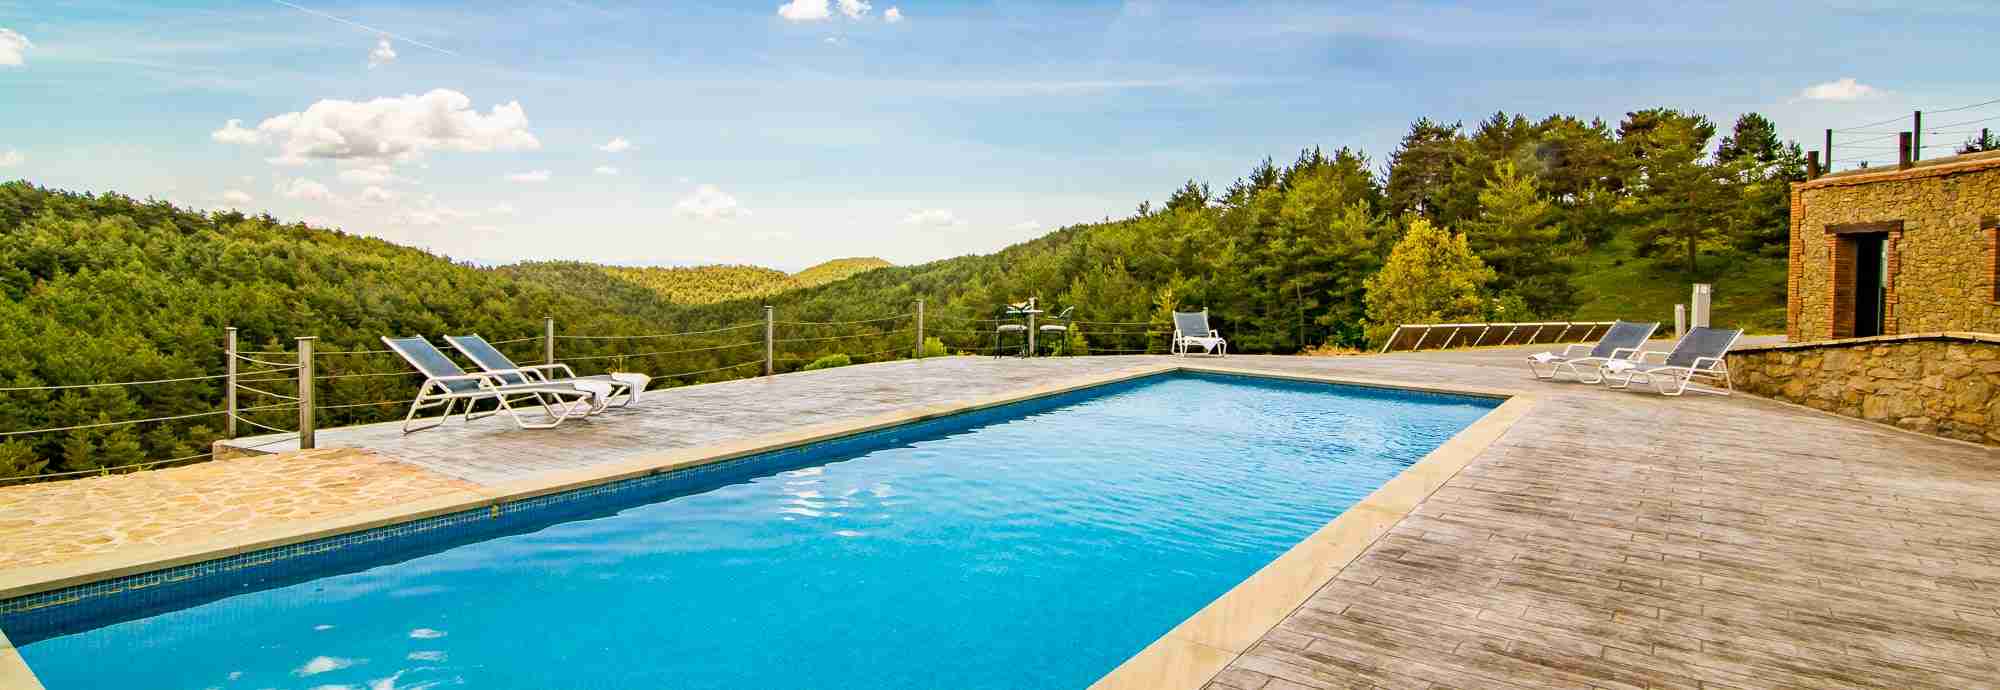 Pretty apartment in Pyrenees farmstead with heated pool, 90 mins from Barcelona